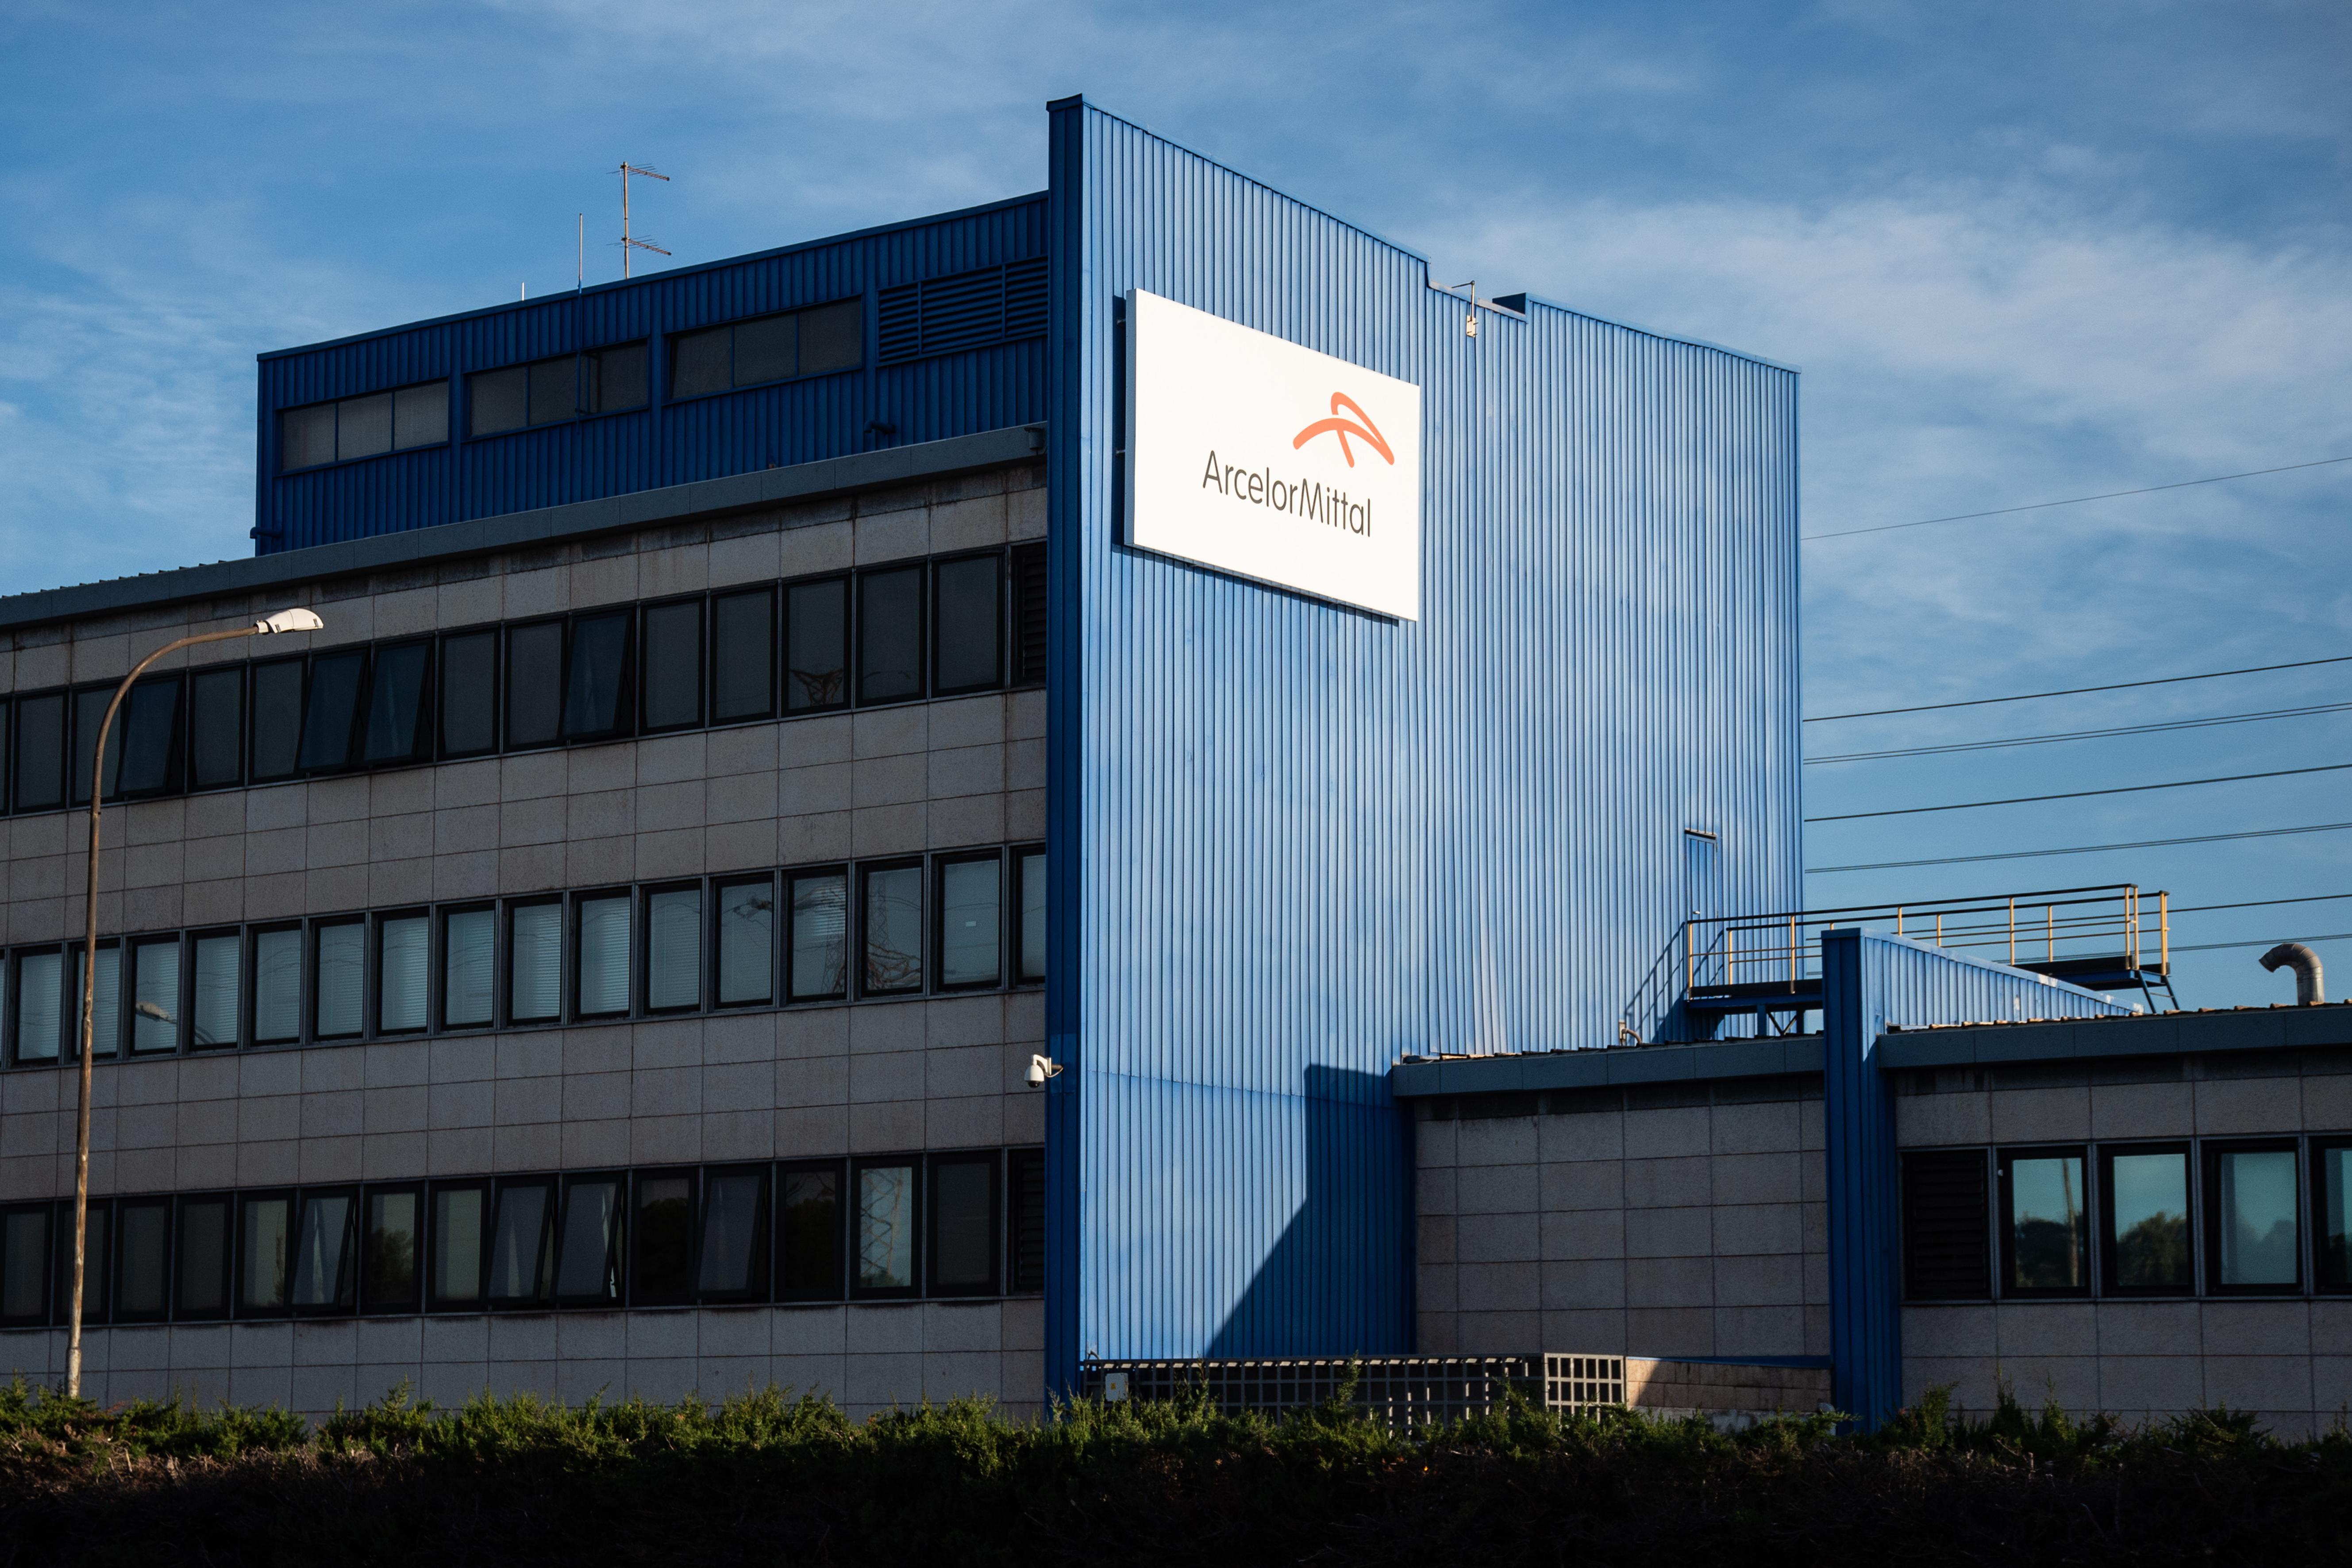 Cleveland-Cliffs Buying ArcelorMittal